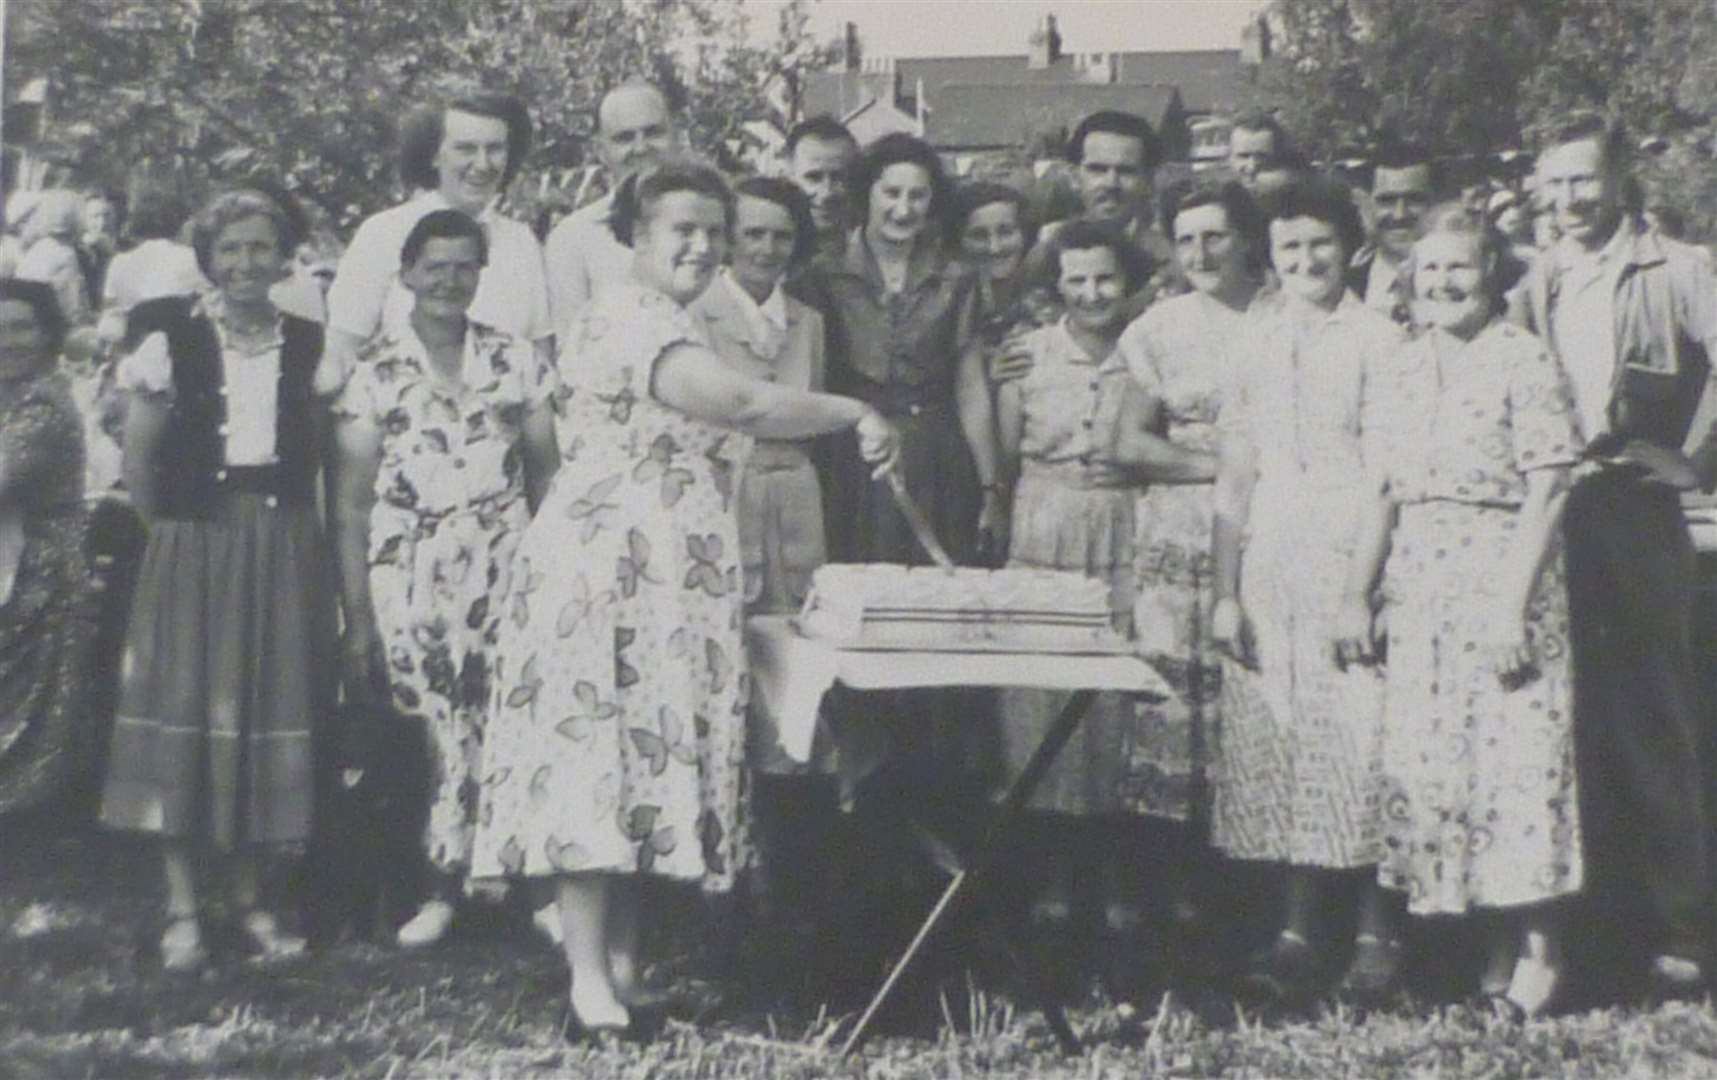 Peter Mantle’s mother cut the cake at a celebration in Chalkwell Road. Picture: Peter Mantle